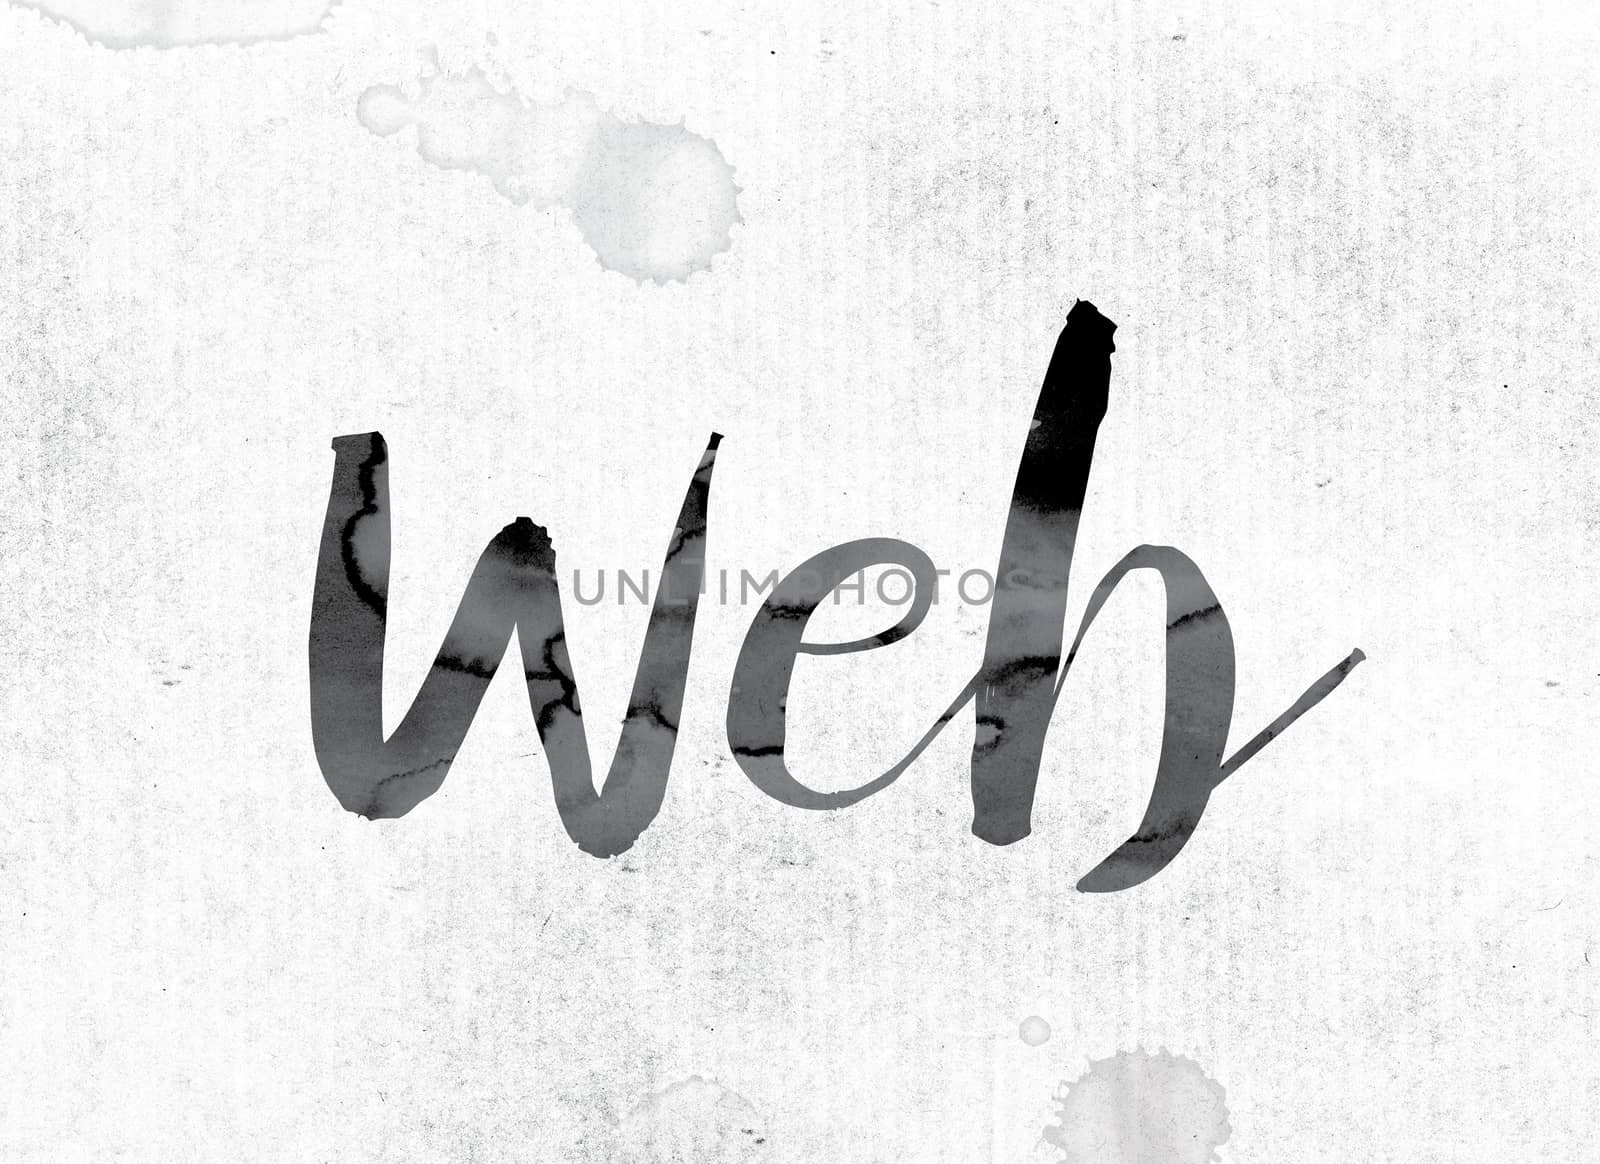 The word "Web" concept and theme painted in watercolor ink on a white paper.